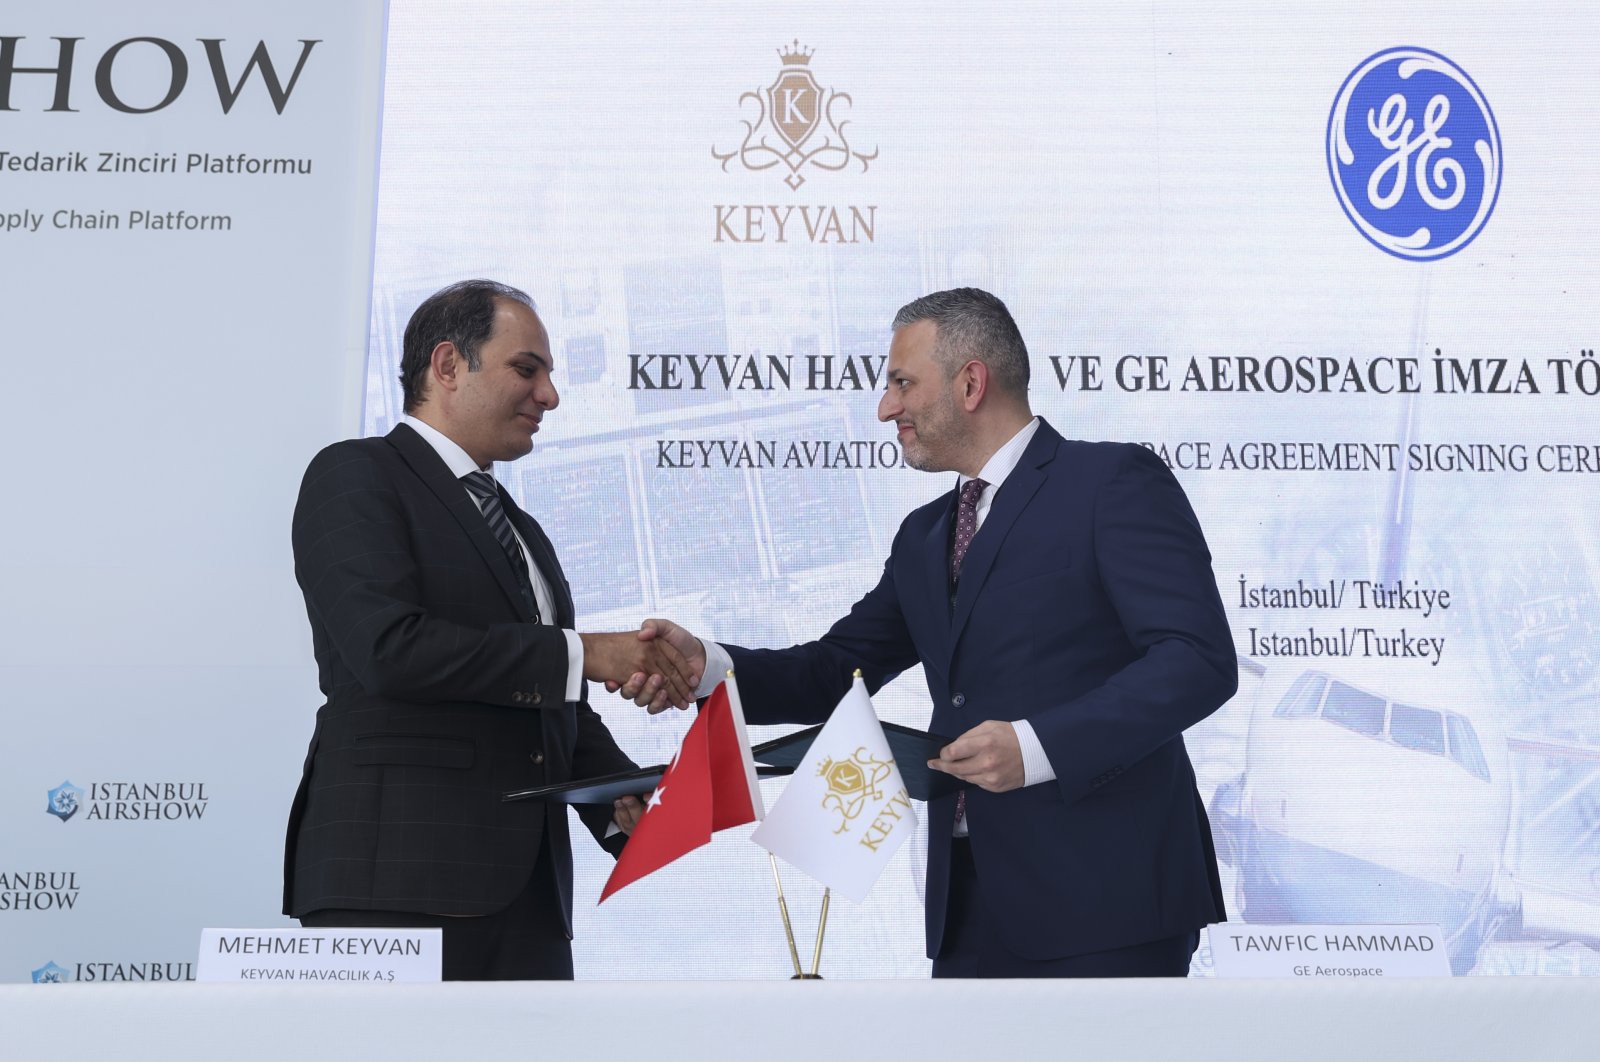 Mehmet Keyvan (L), CEO of Keyvan Aviation, and Tawfic Hammad, EMEA commercial director at GE Aerospace, shake hands after a signing ceremony in Istanbul, Türkiye, Oct. 6, 2022. (AA Photo)